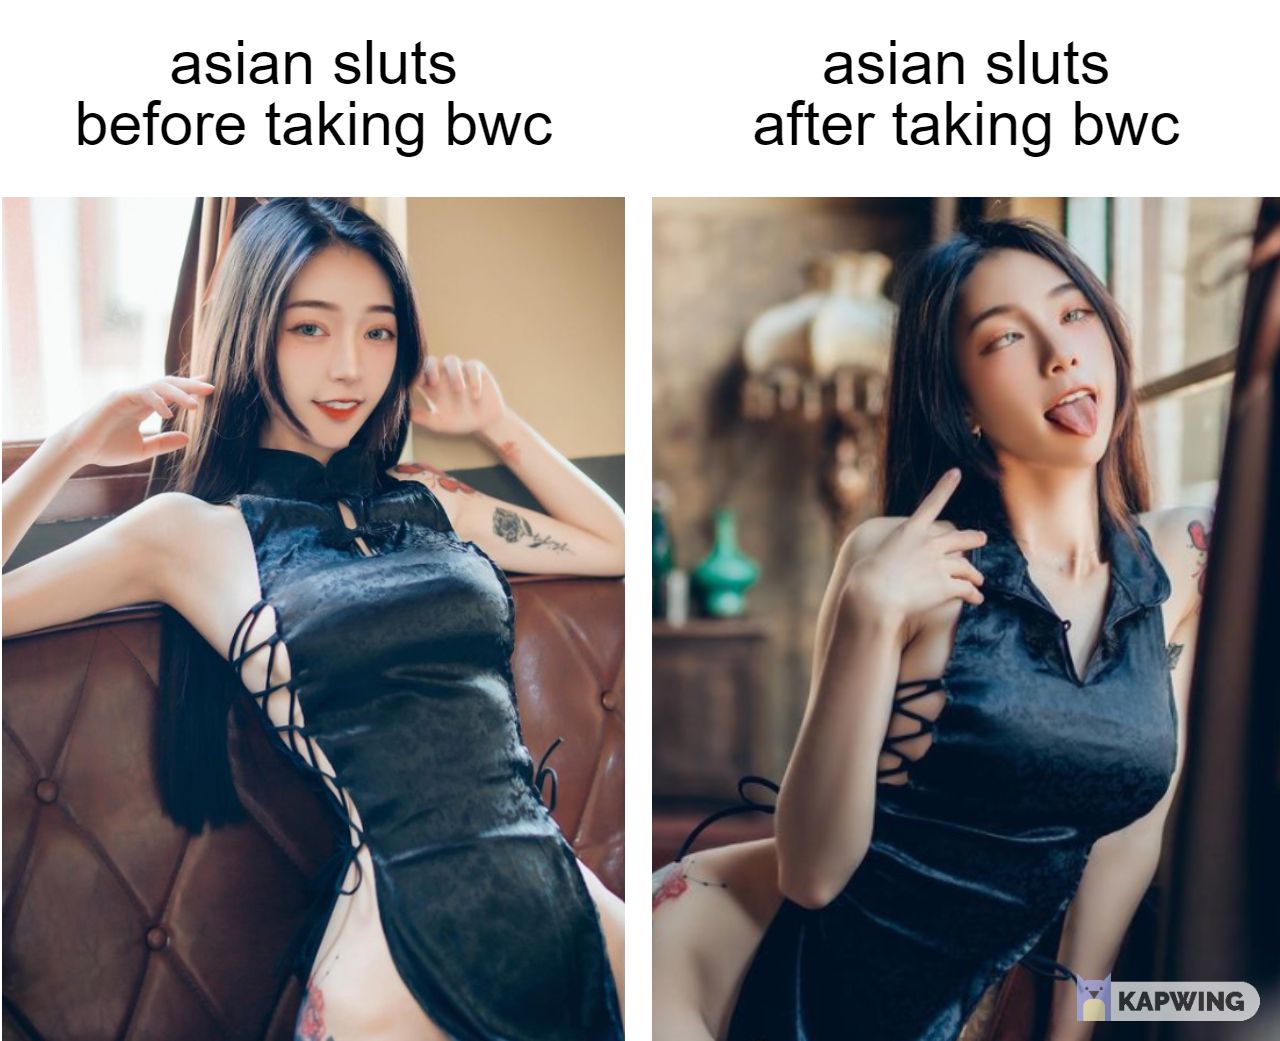 Before Bwc Vs After Bwc Scrolller 4659